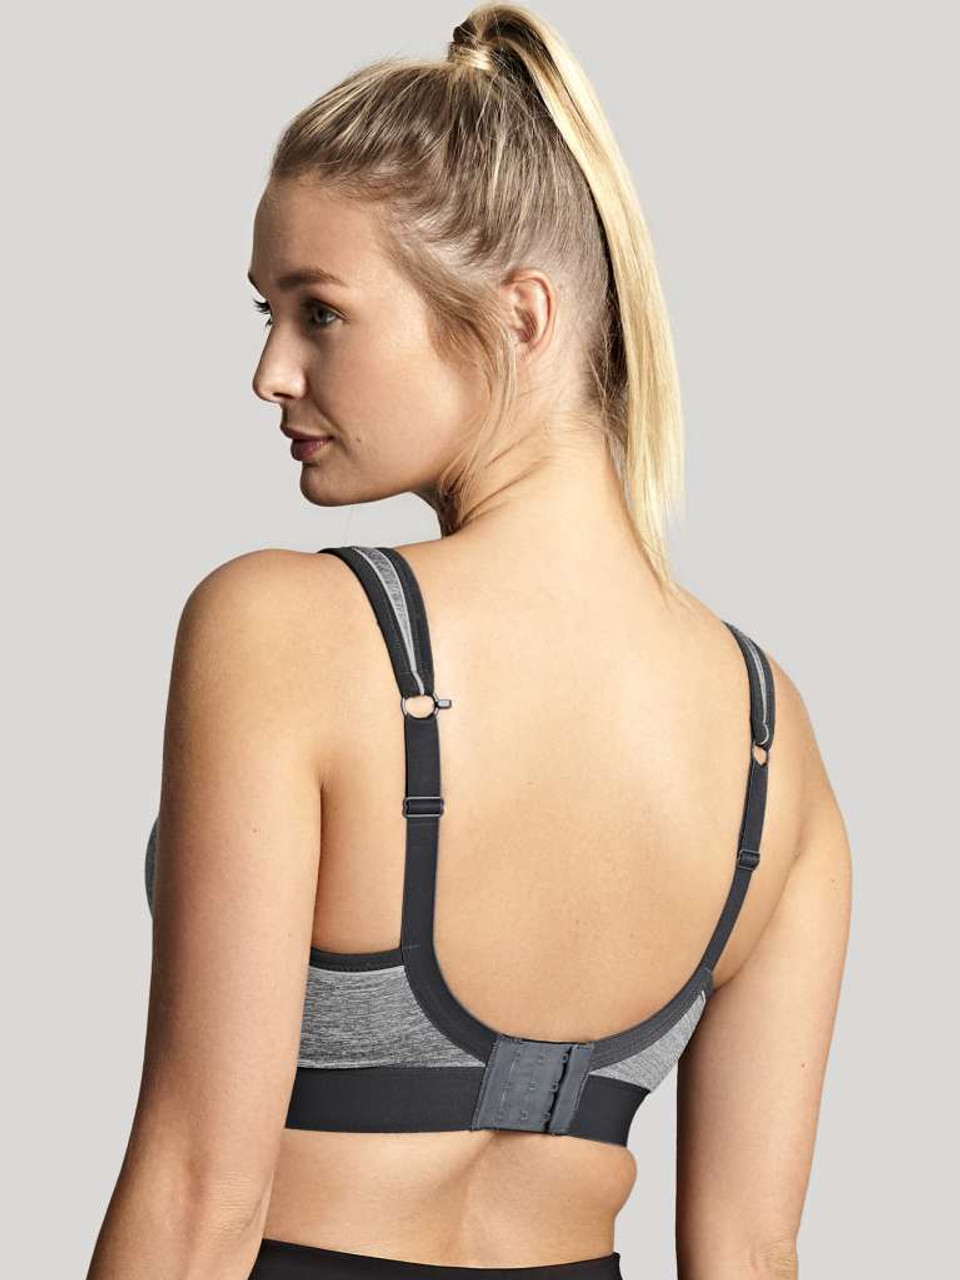 Panache Non-Wired Sports Bra in Warm Taupe - Busted Bra Shop